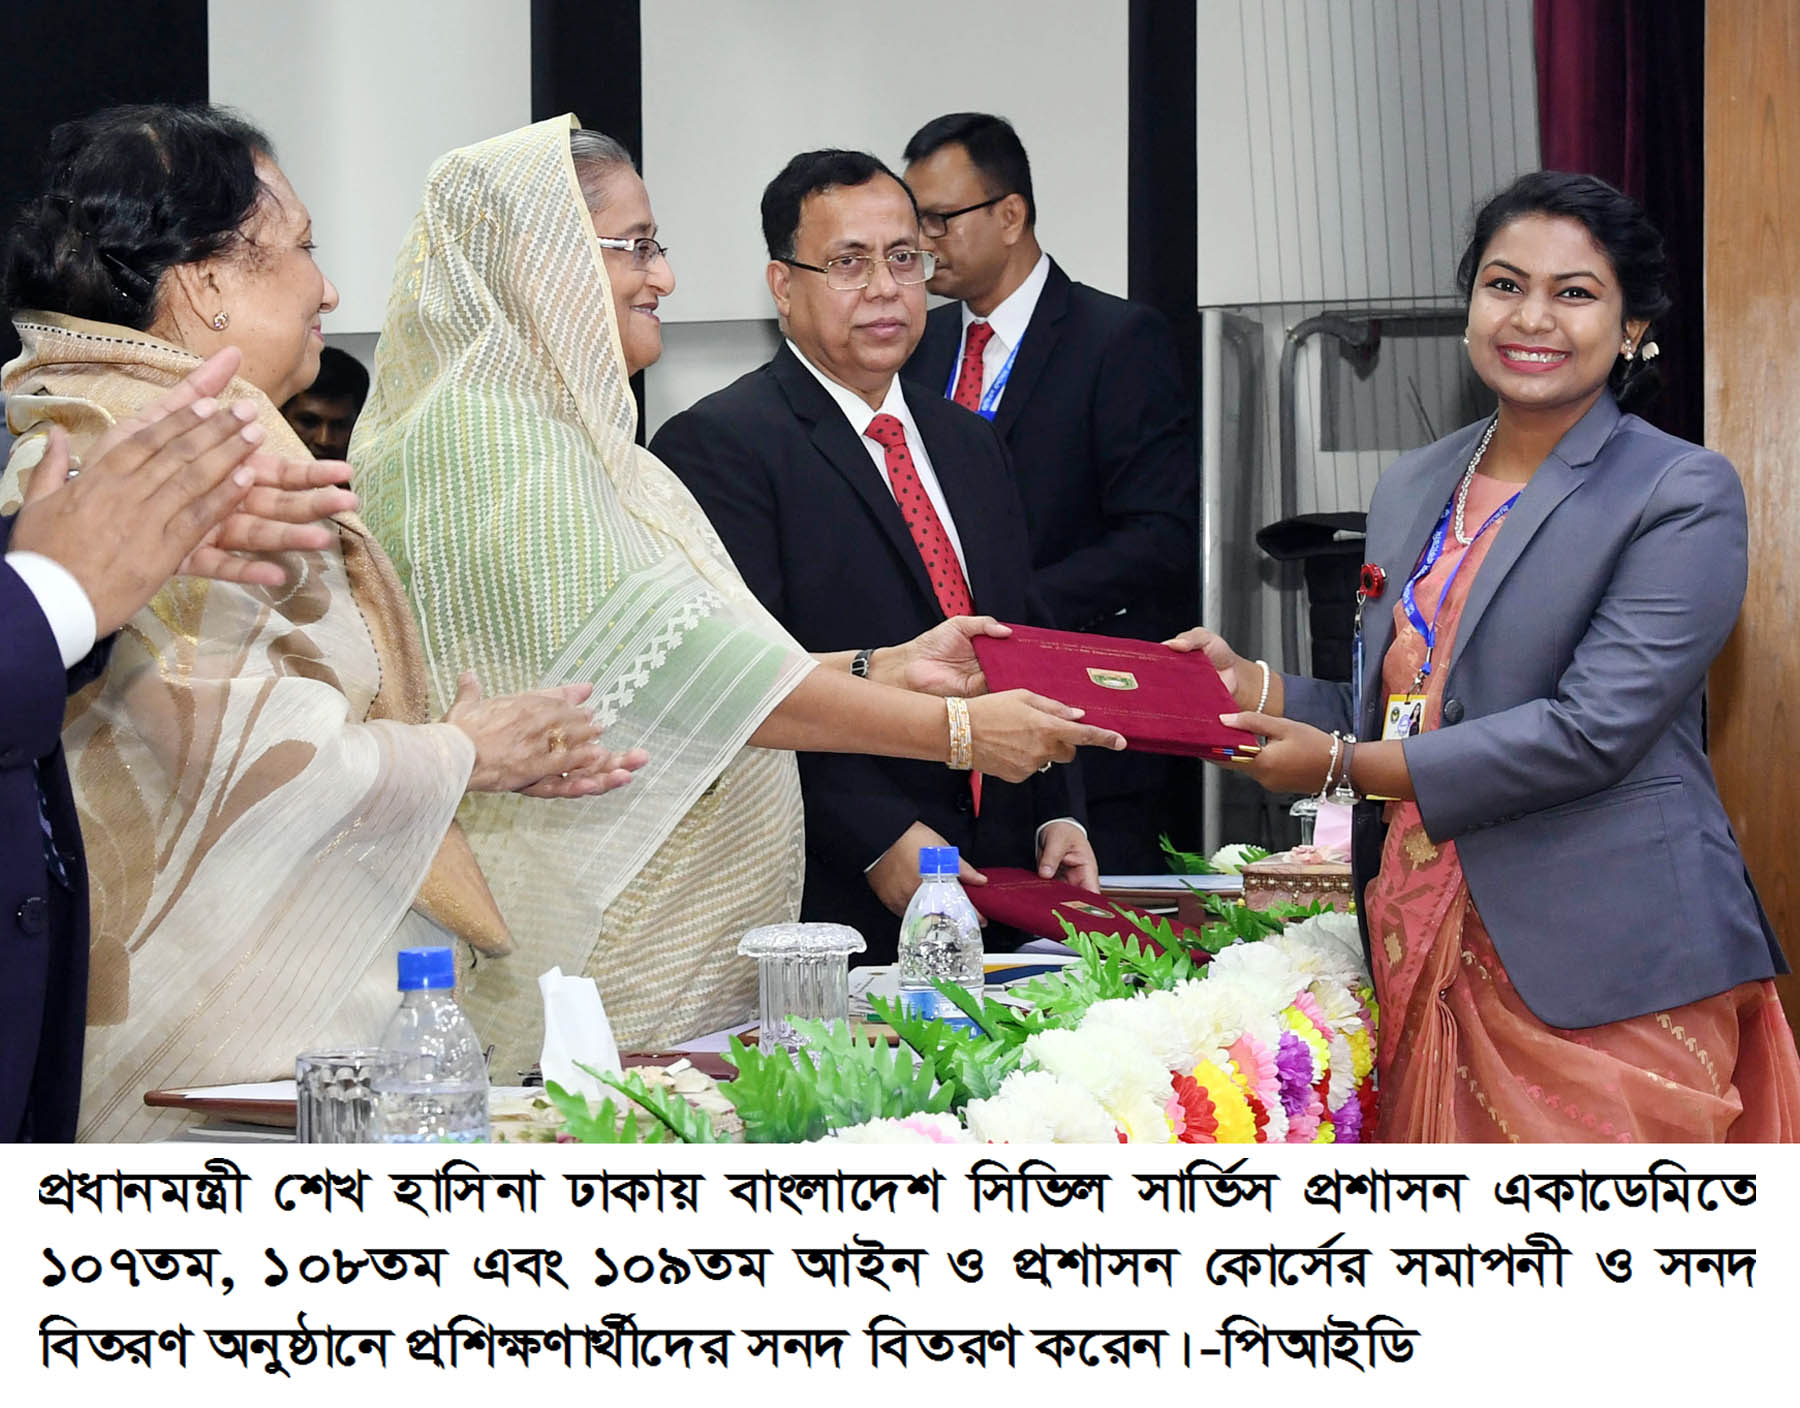 PM Hasina urges government employees to create corruption-free nation